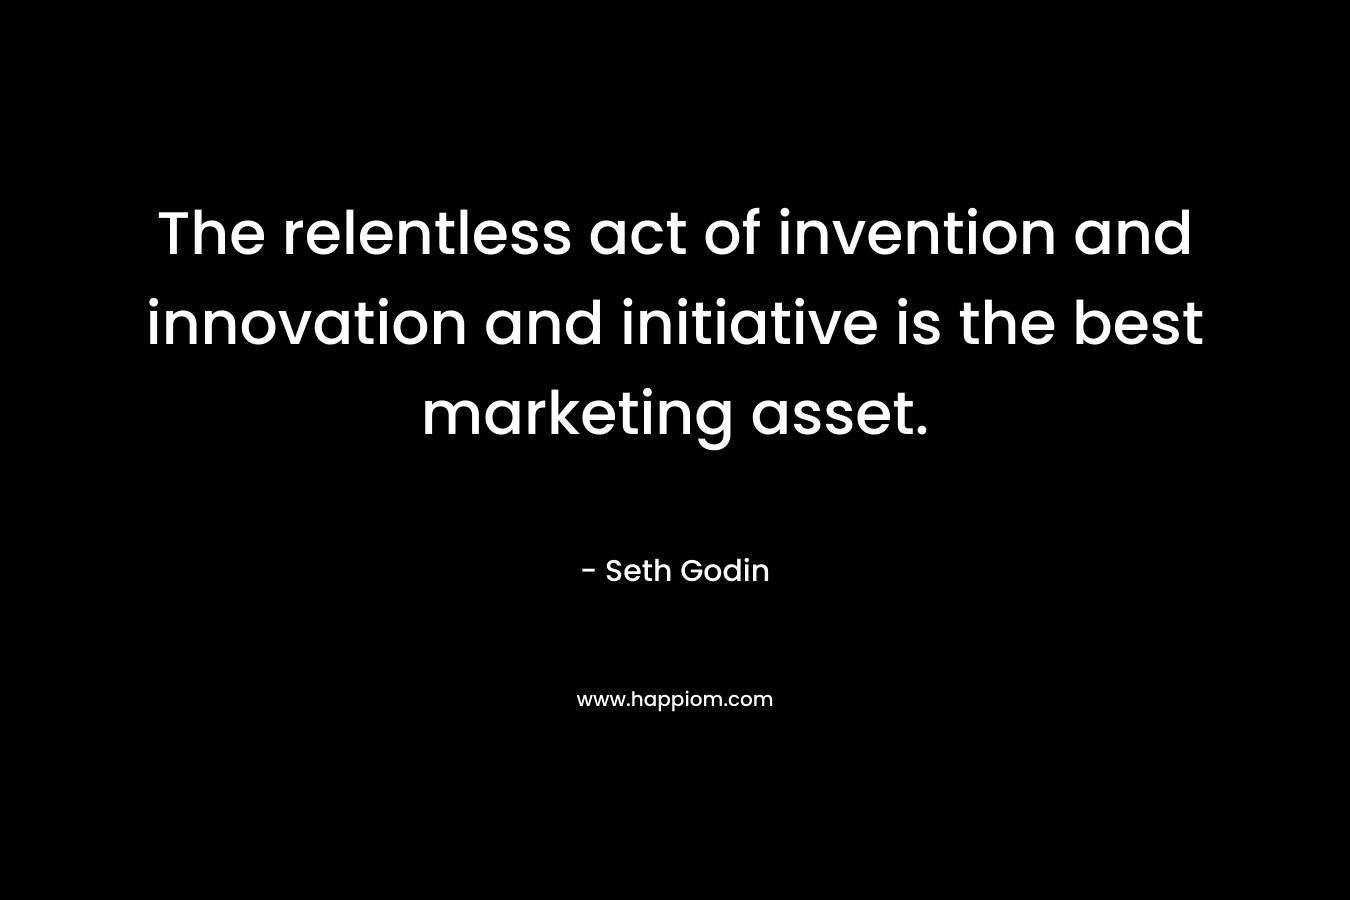 The relentless act of invention and innovation and initiative is the best marketing asset.